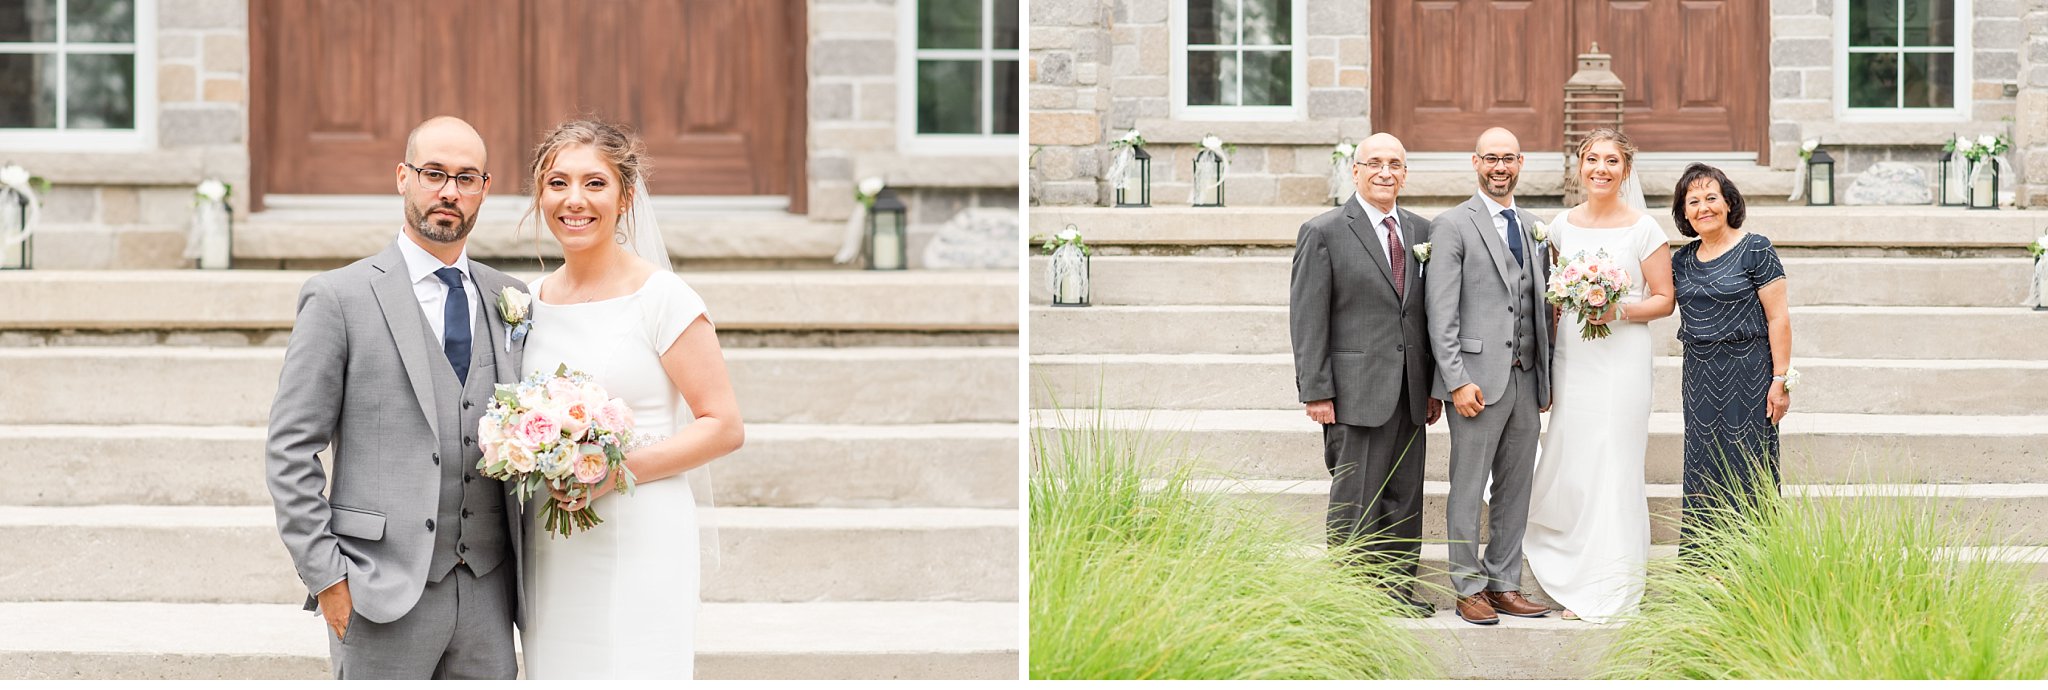 family photos on a wedding day by london ontario wedding photographer life is beautiful photography